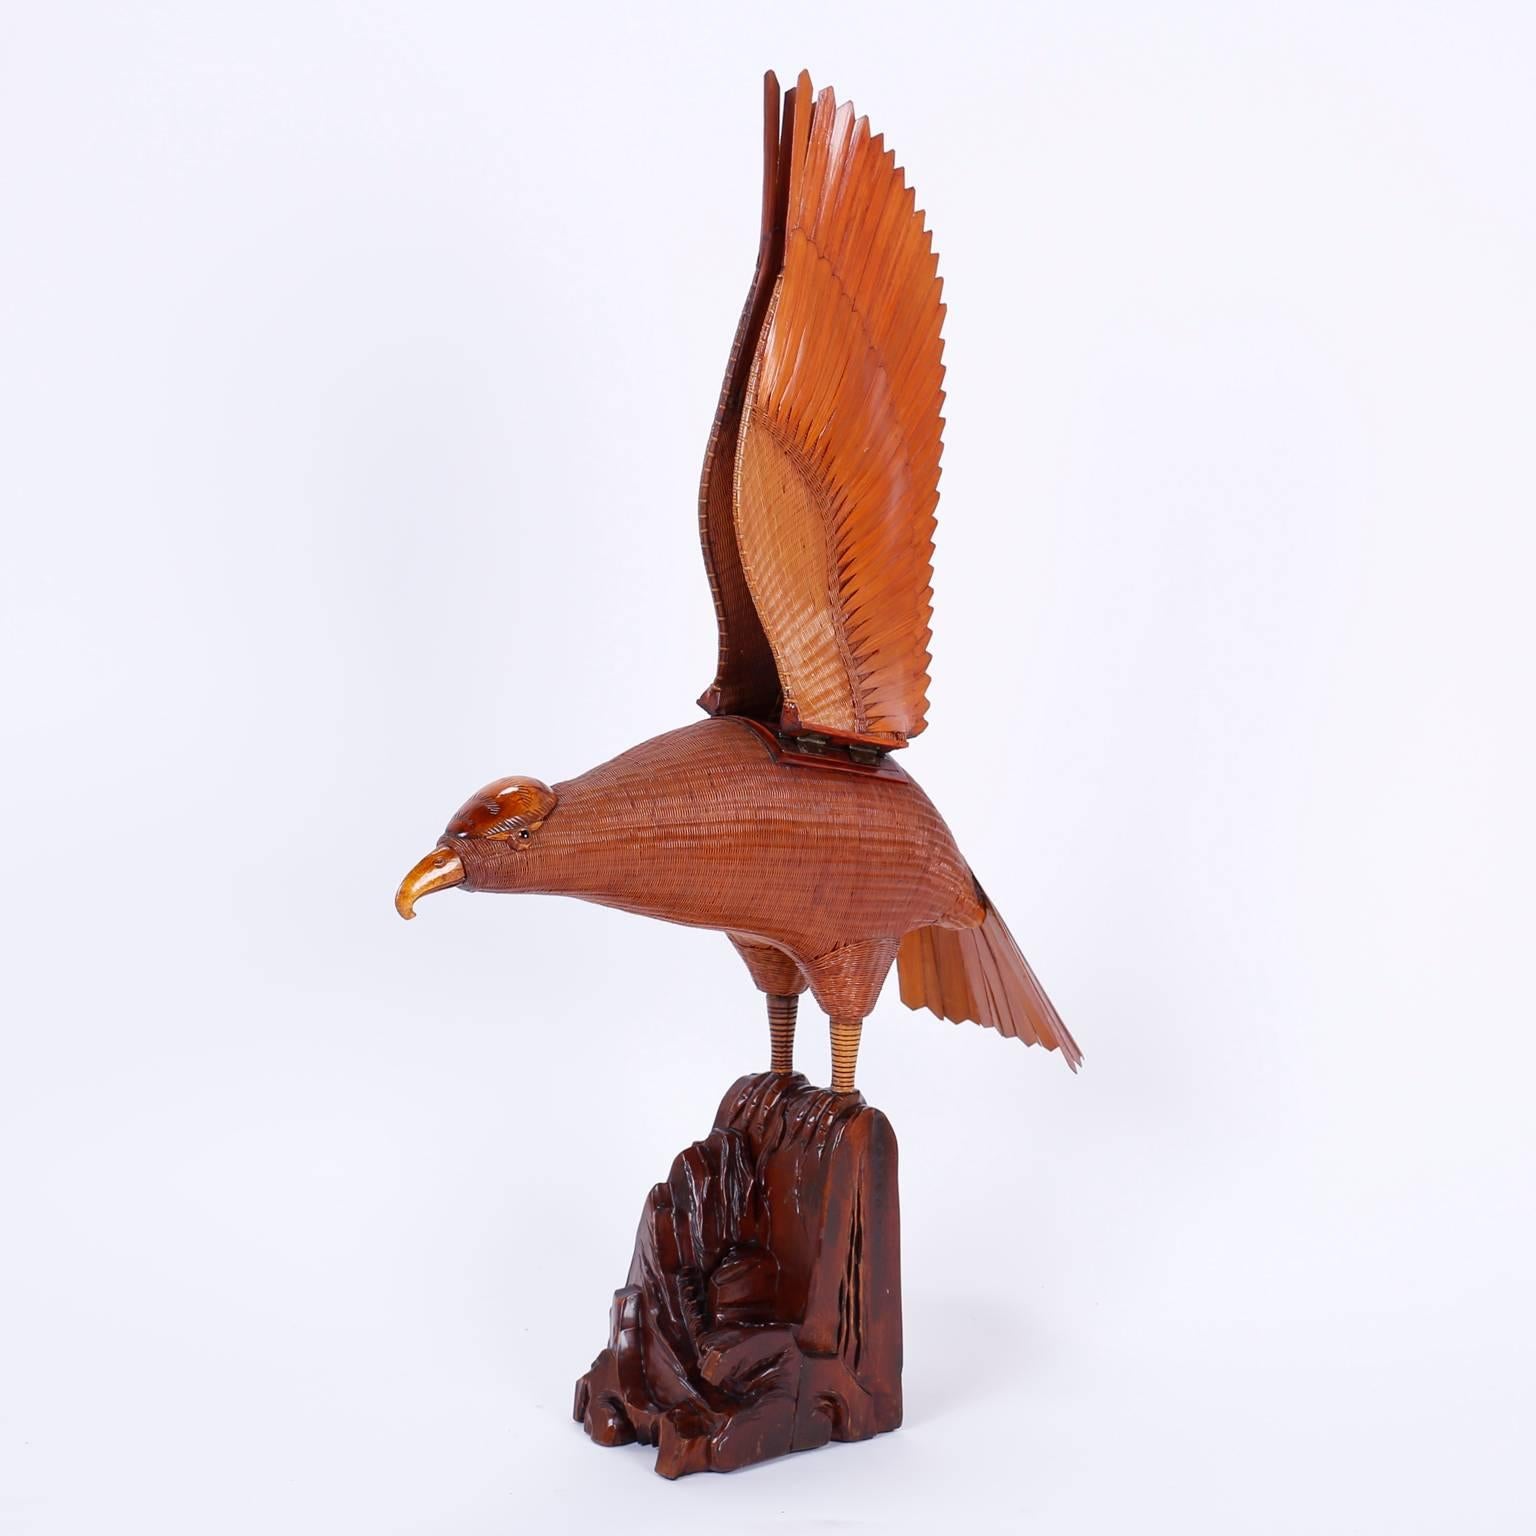 Wicker bird or falcon from the famed shanghai collection expertly crafted in wicker and rattan with movable and removable carved wood wings and perched on an organic root specimen. Best of the collection.